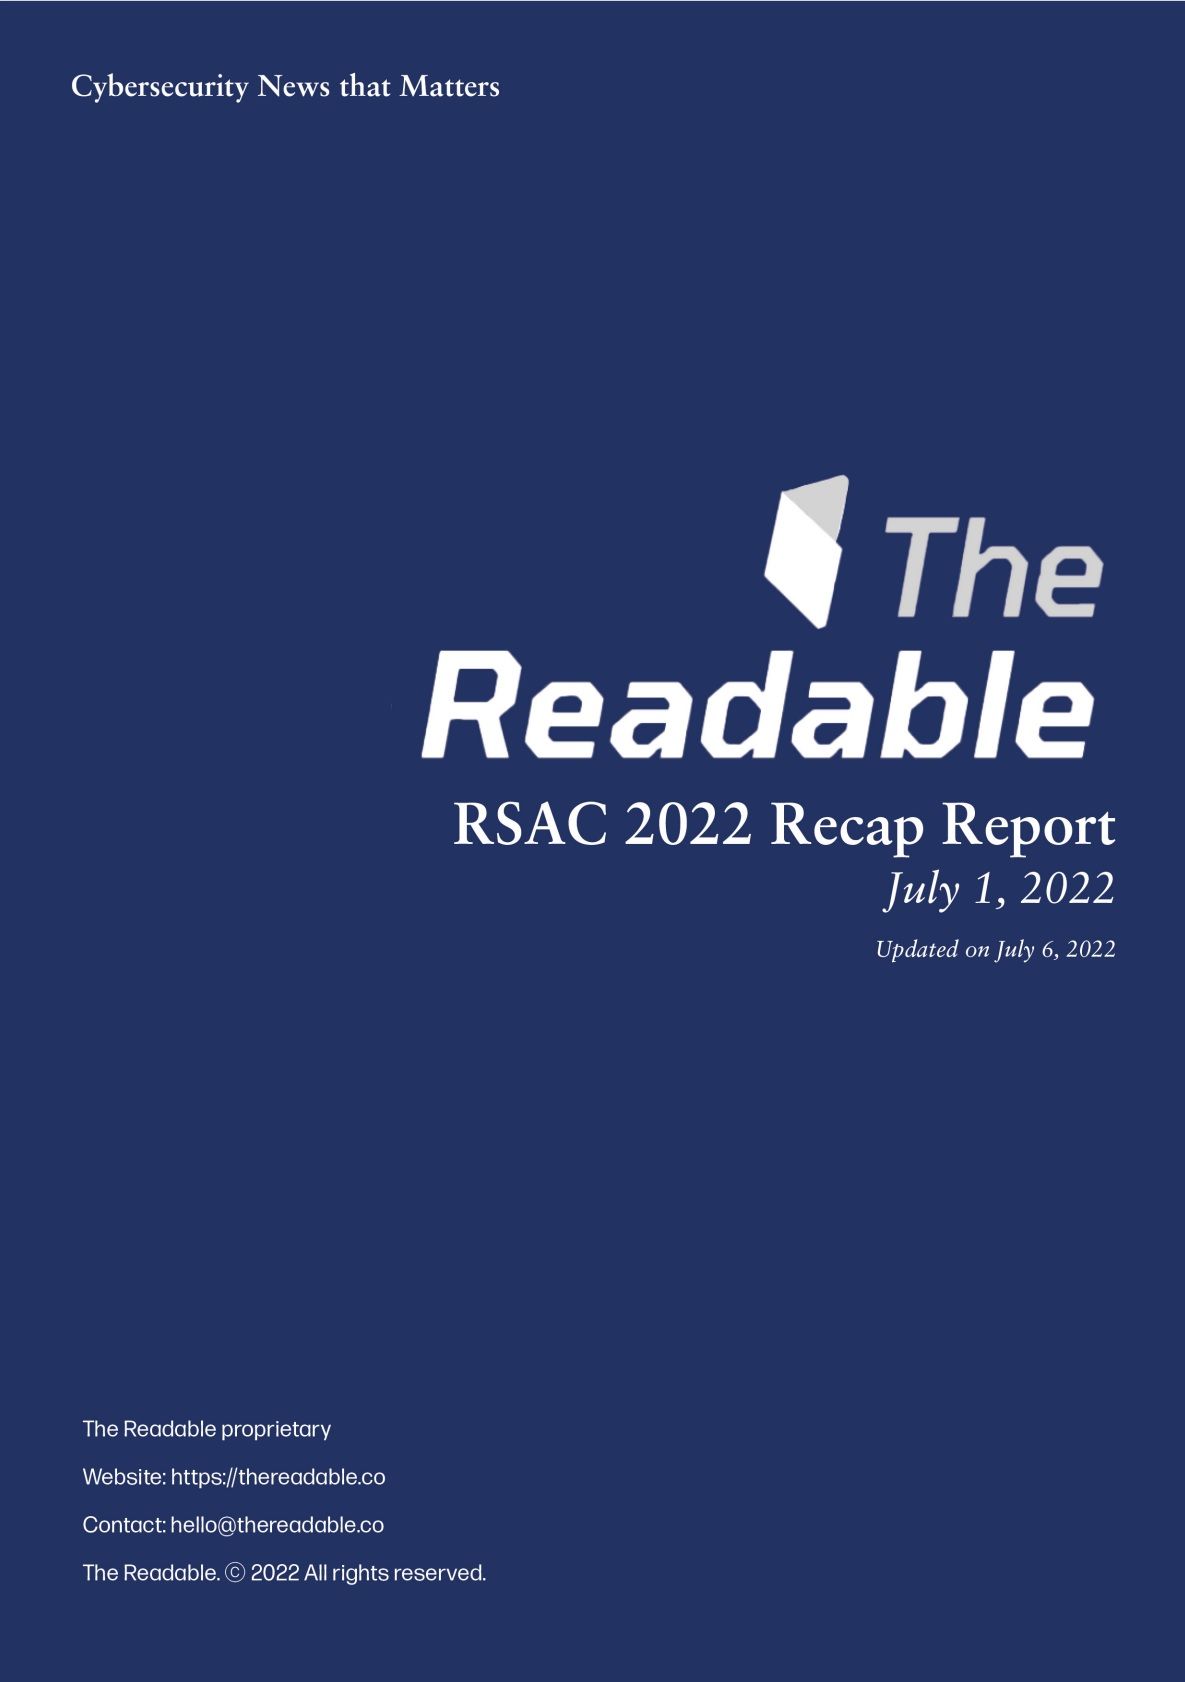 RSAC 2022 Recap Report Updated Cover - The RSA Conference 2022 Recap Report by The Readable